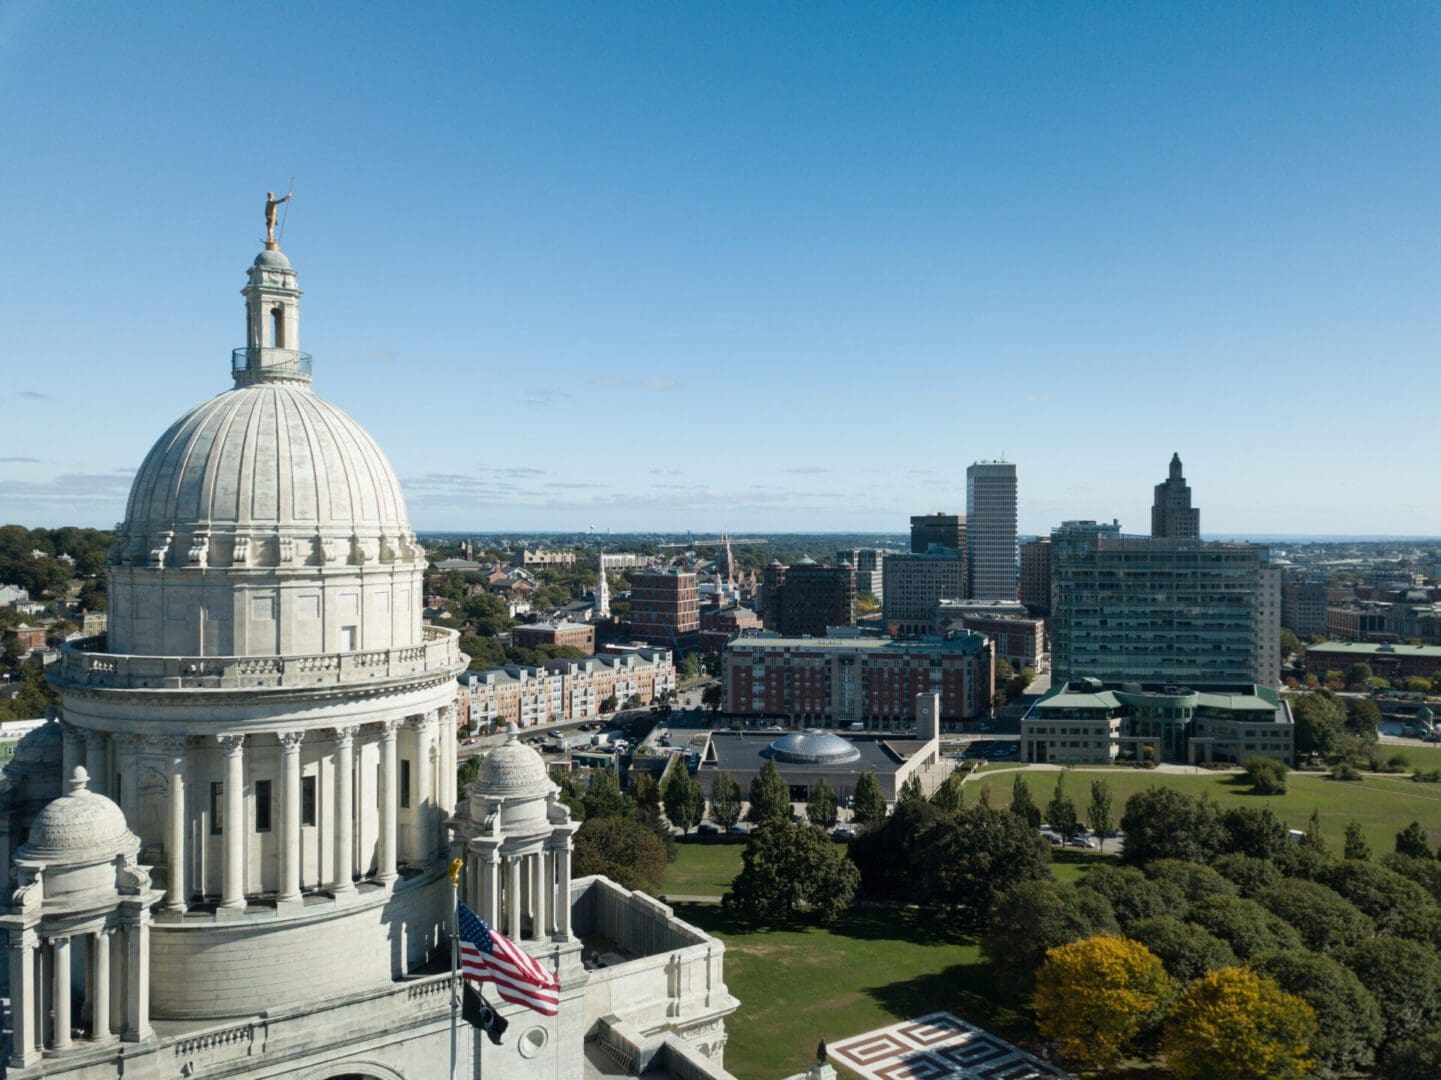 An aerial view of the state capitol building in cambridge, massachusetts.